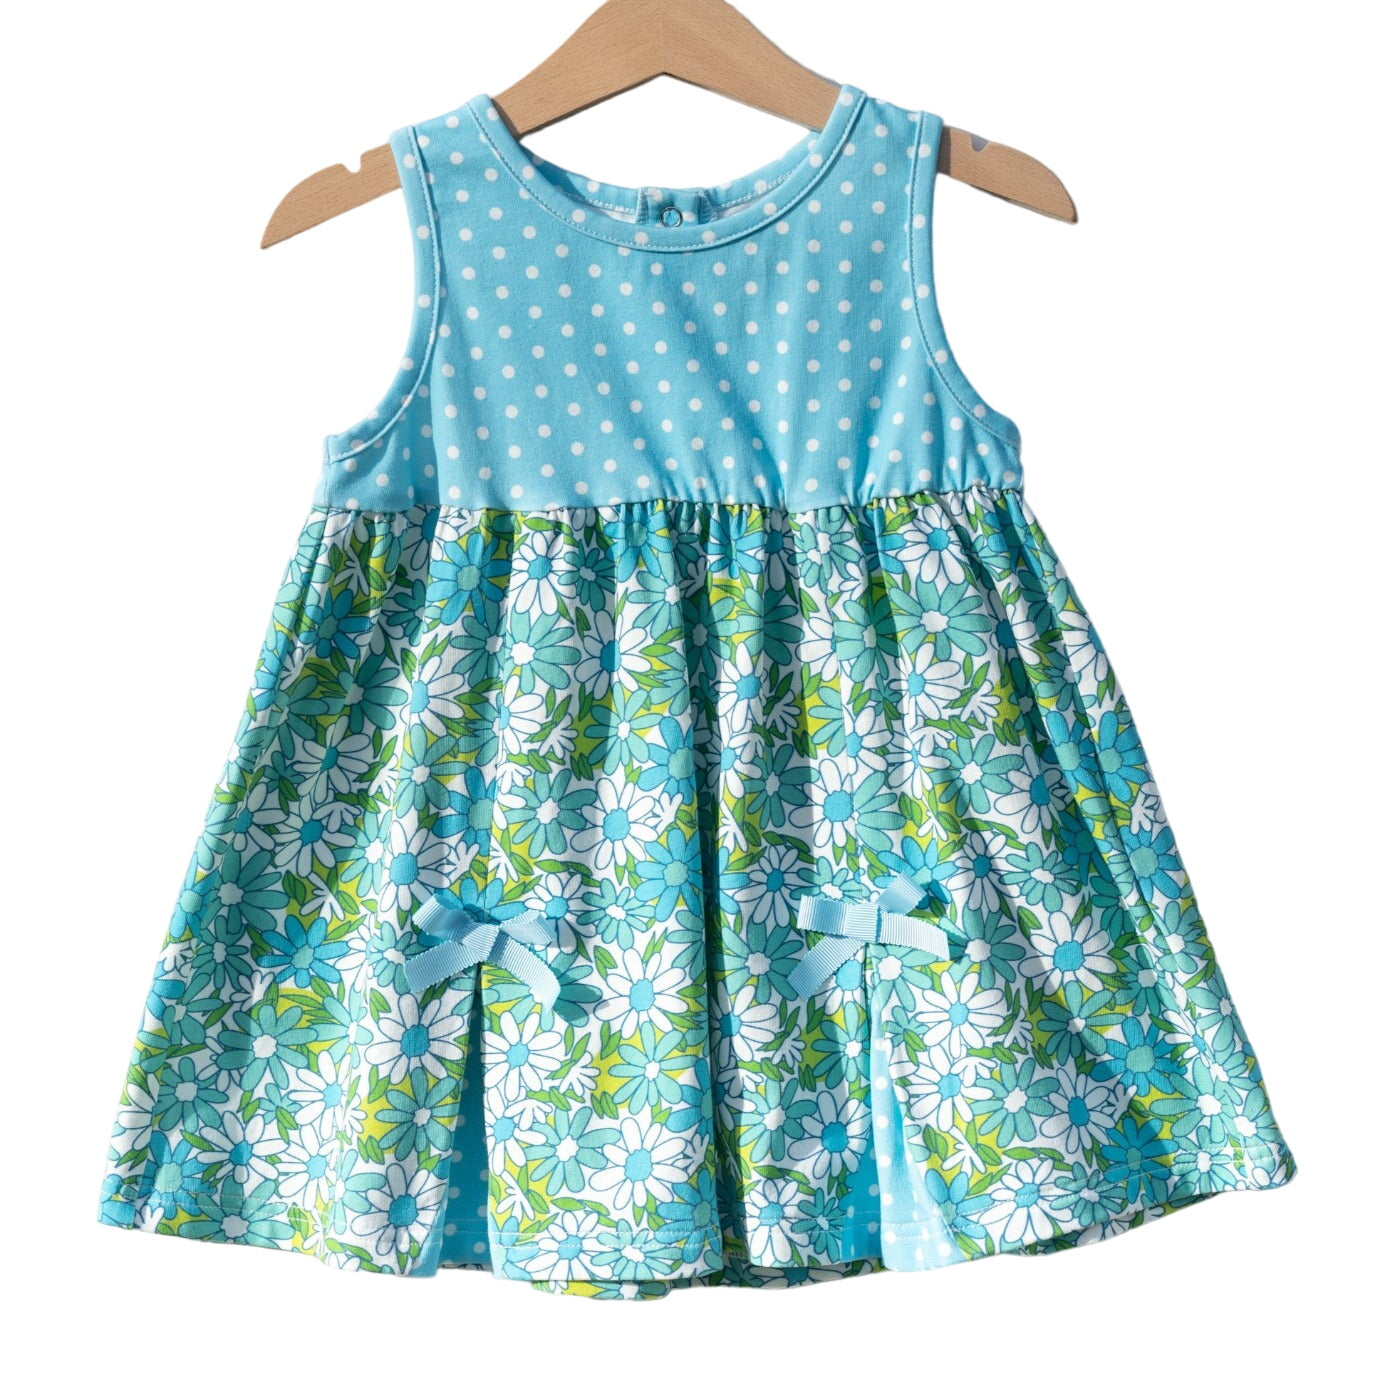 Blue Flower Power And Polka Dot Dress For Baby And Toddler Girls